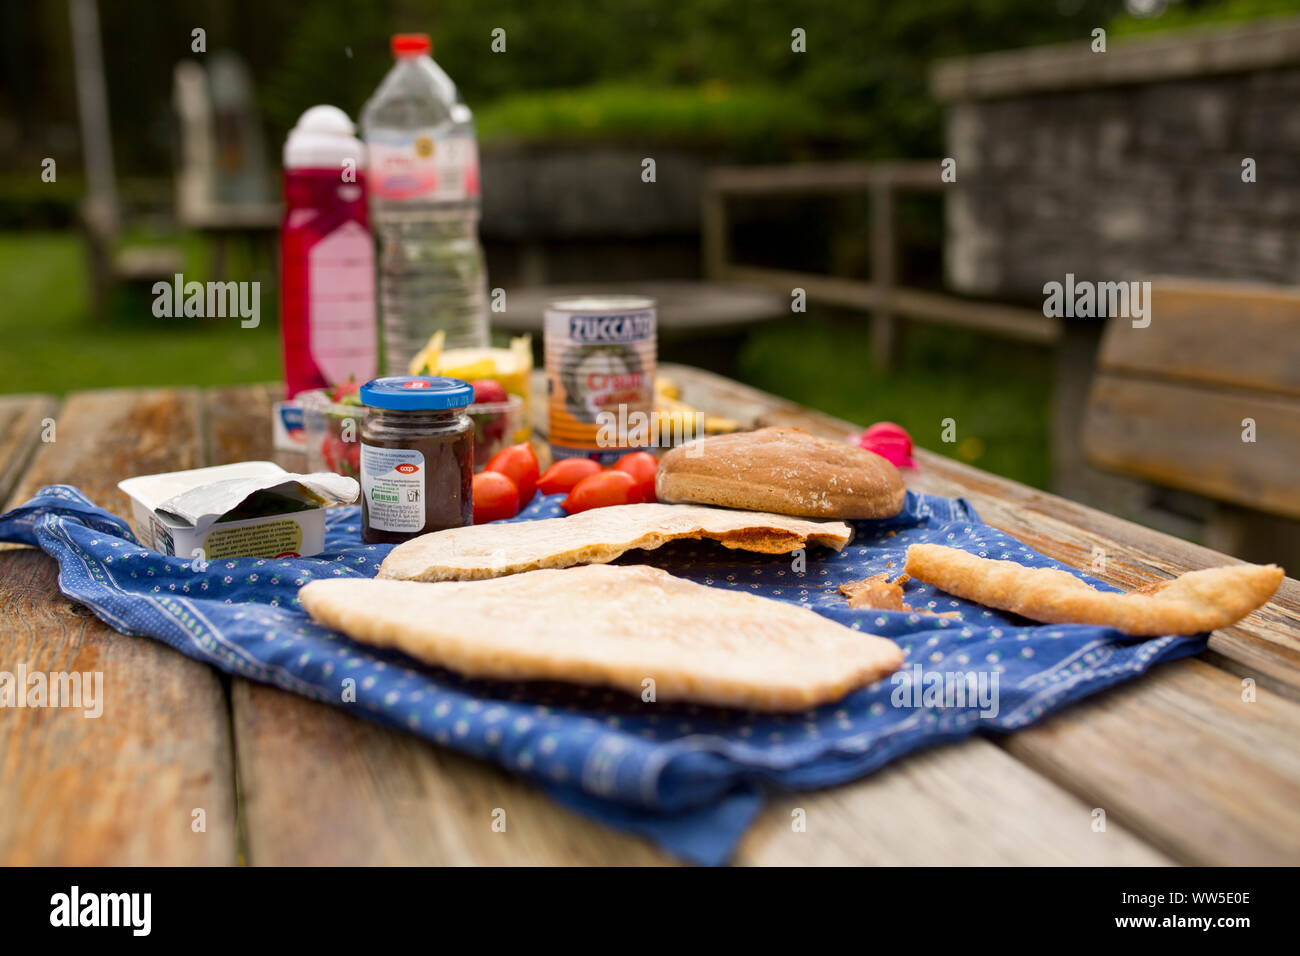 Picnic set on wooden table with bread, tomatoes and headscarf as table cloth Stock Photo